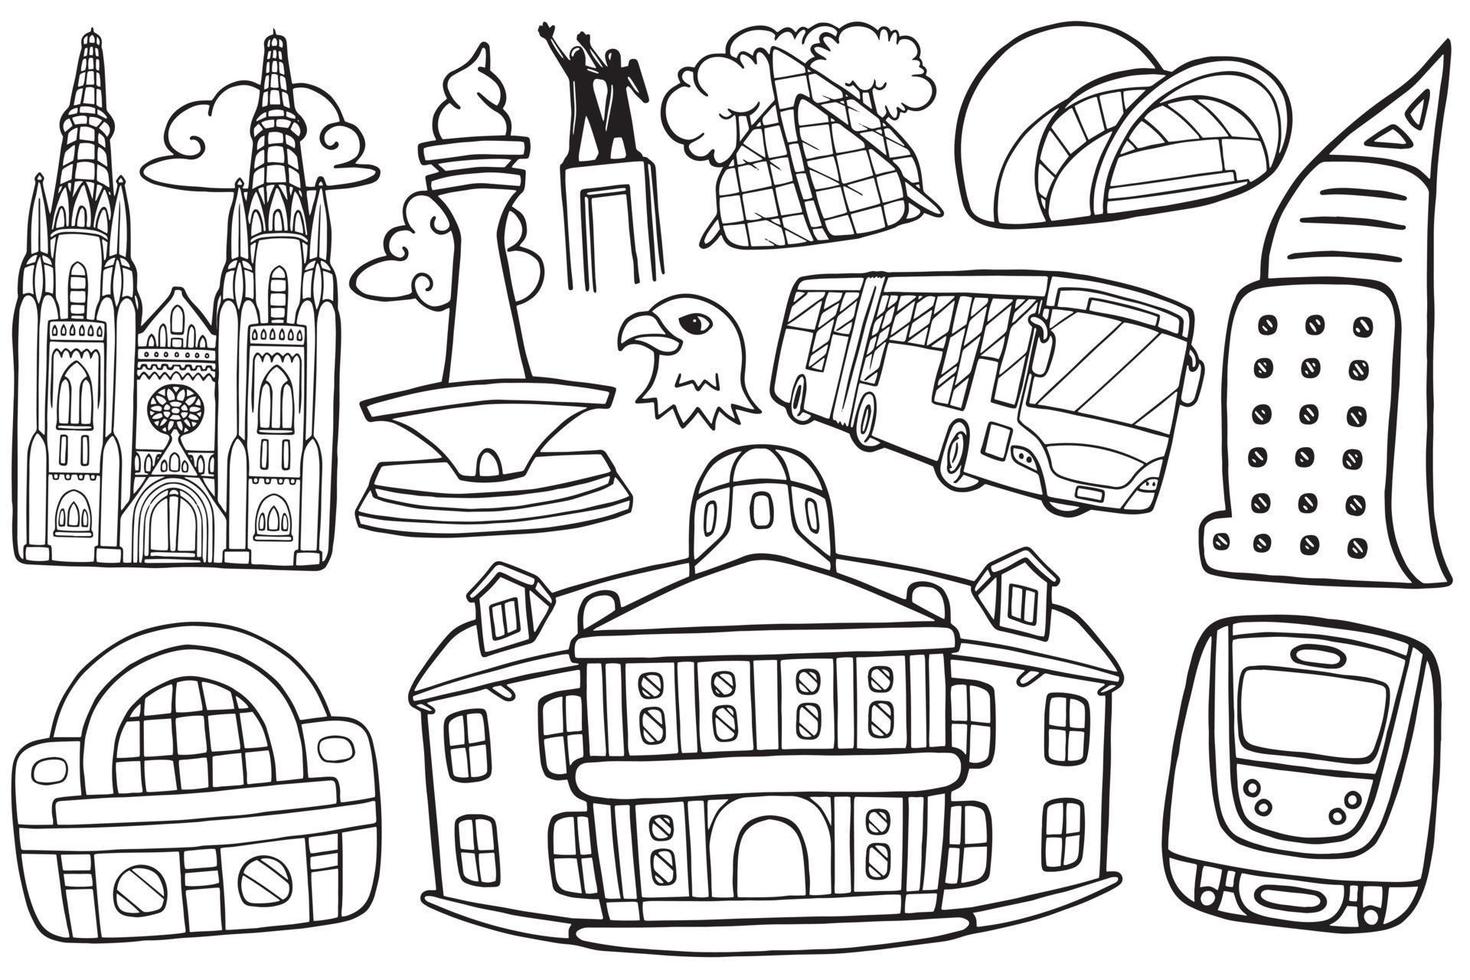 jakarta city object in doodle style vector